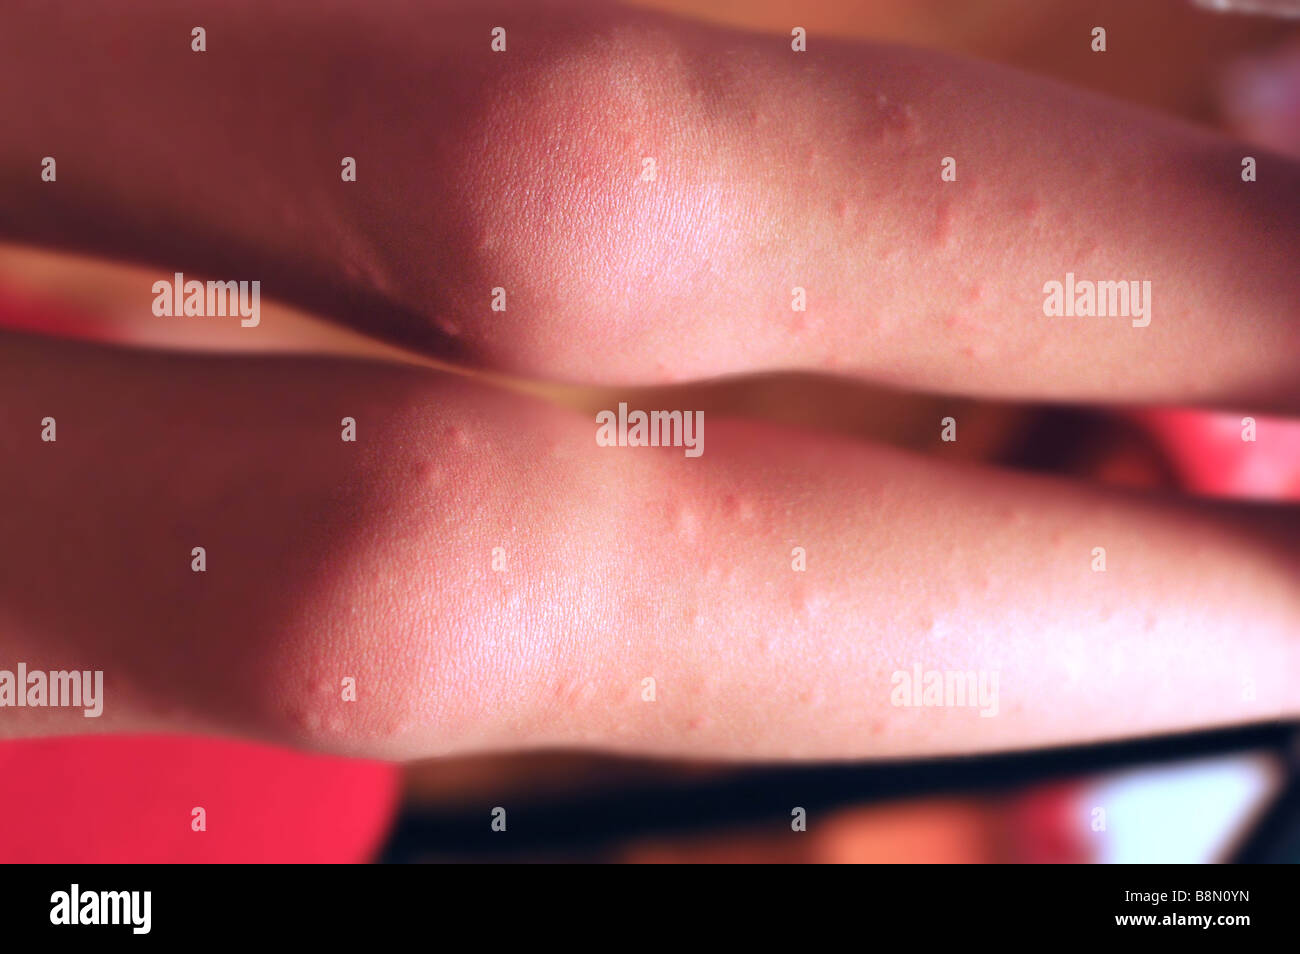 2 Year Old Child's Legs Showing Allergic Reaction to Medicine (Amoxicillin) Stock Photo